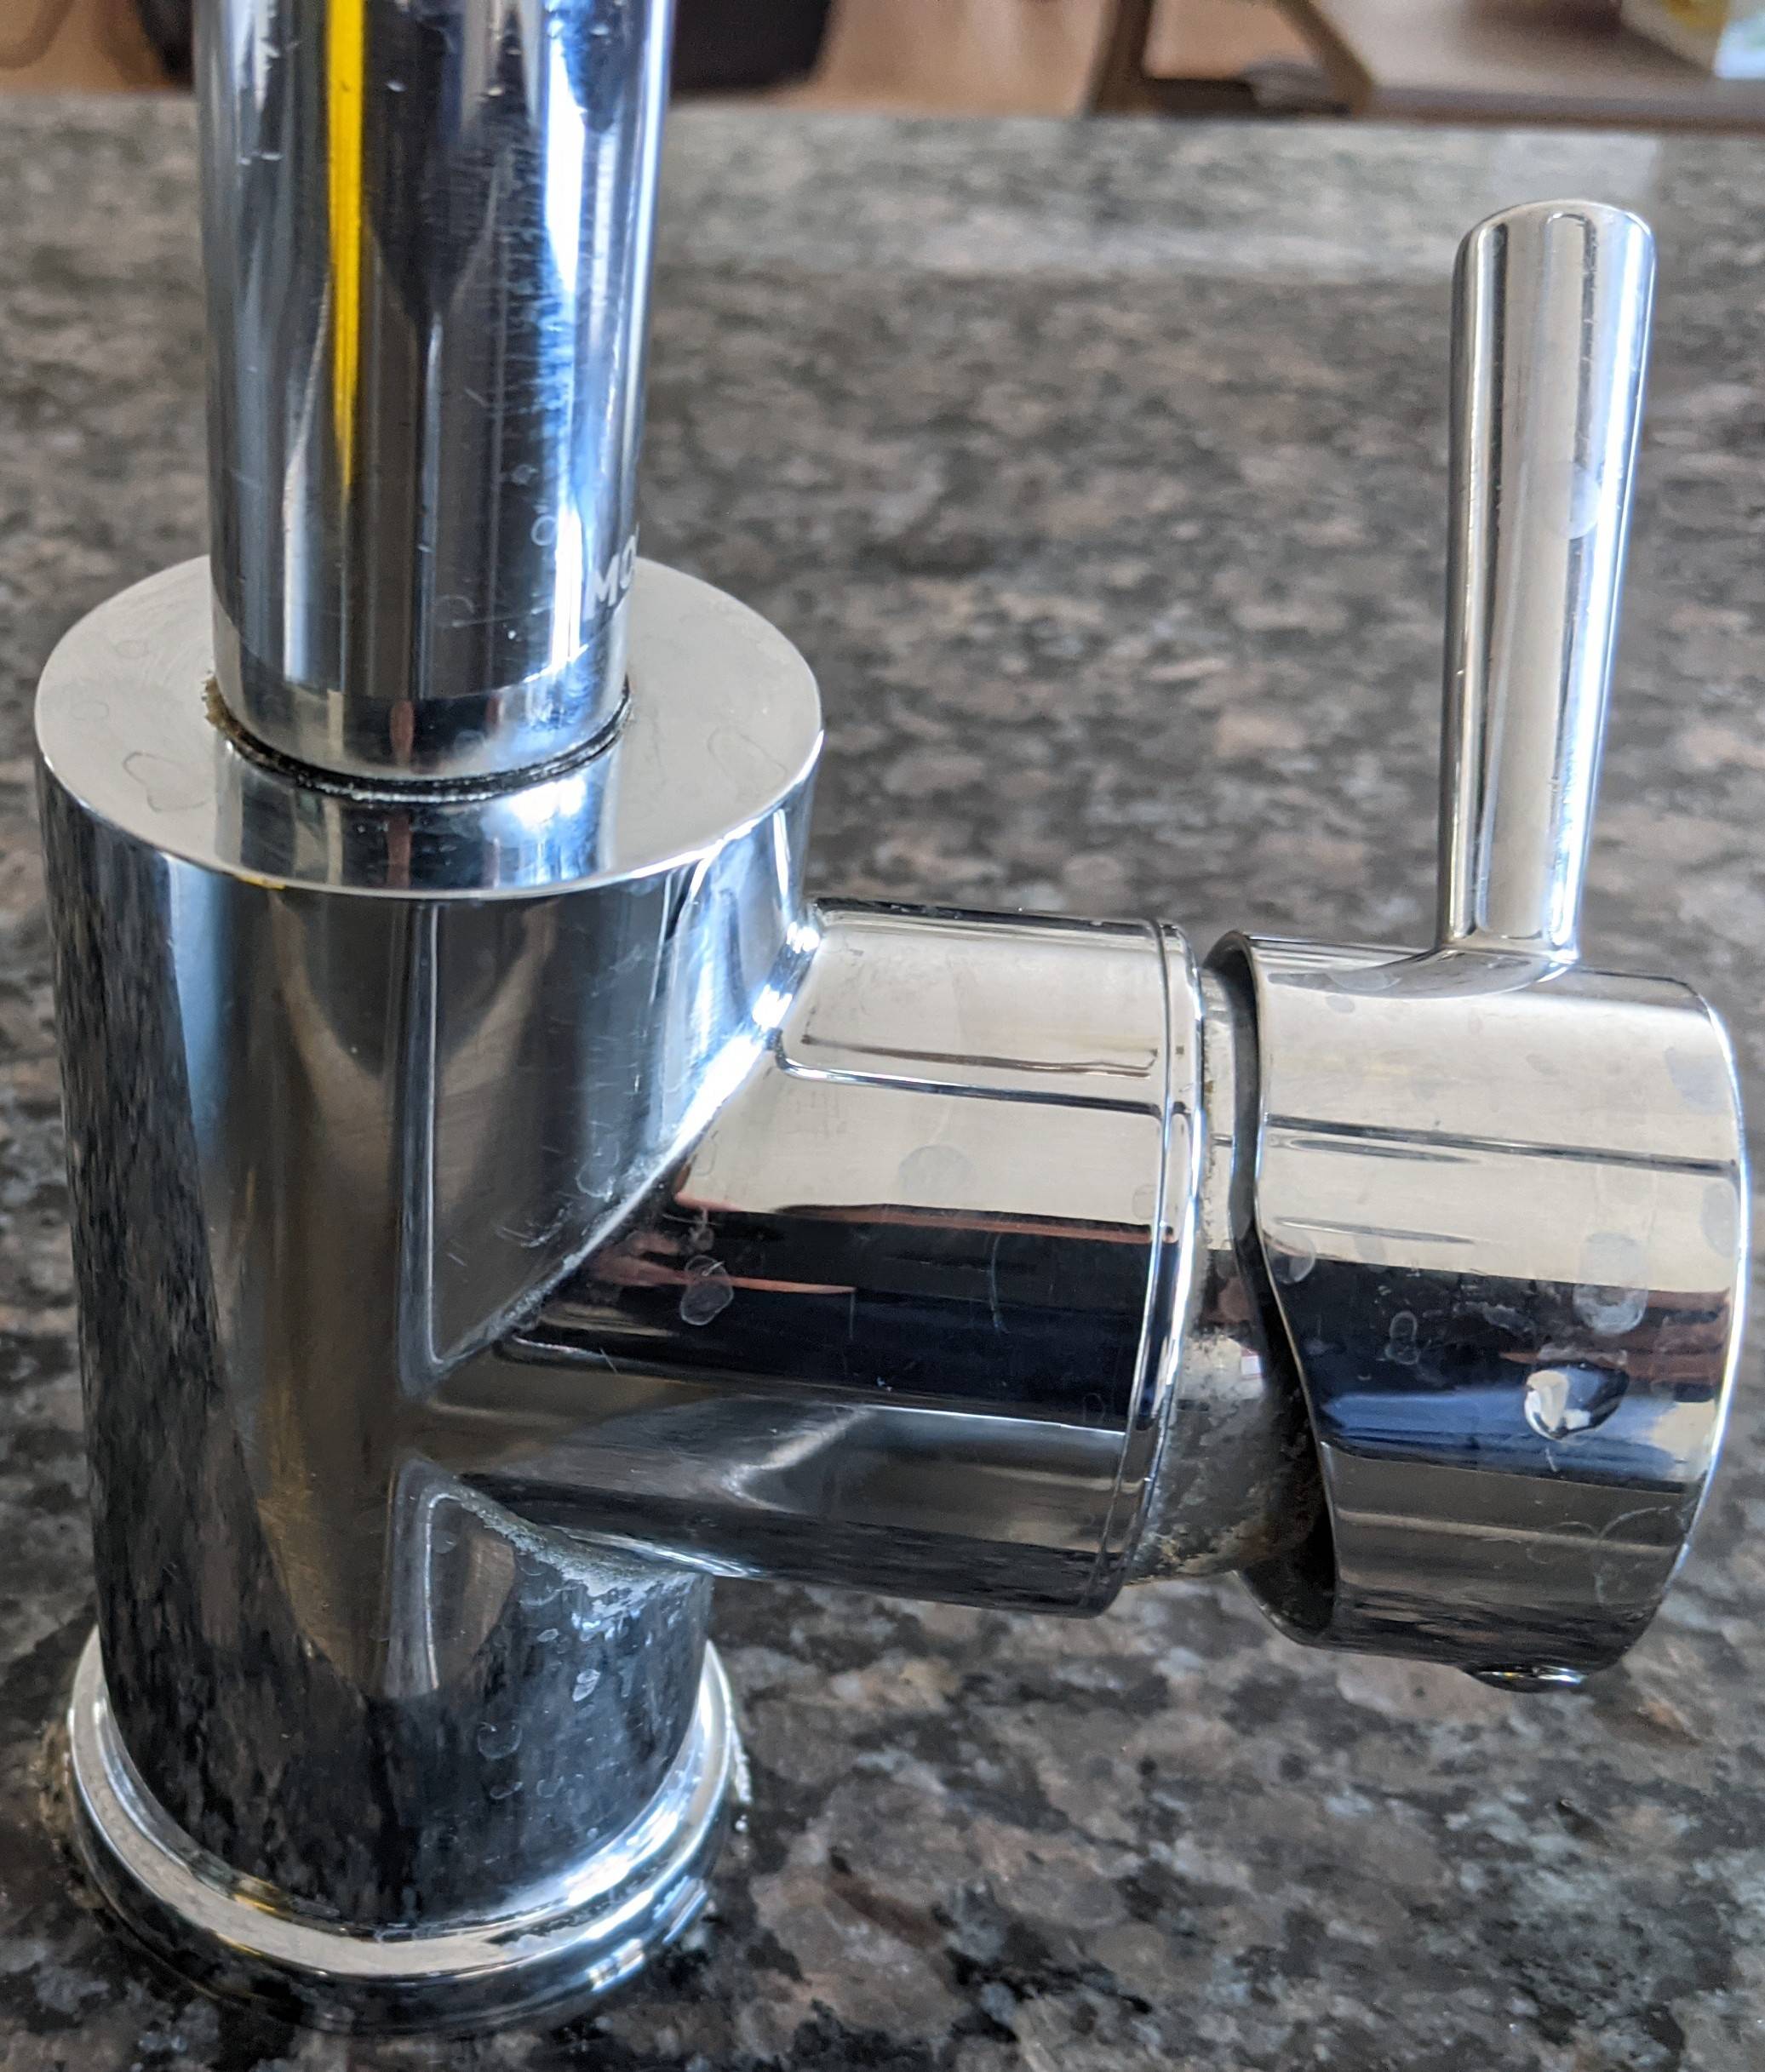 Where is the Model Number on a Moen Kitchen Faucet